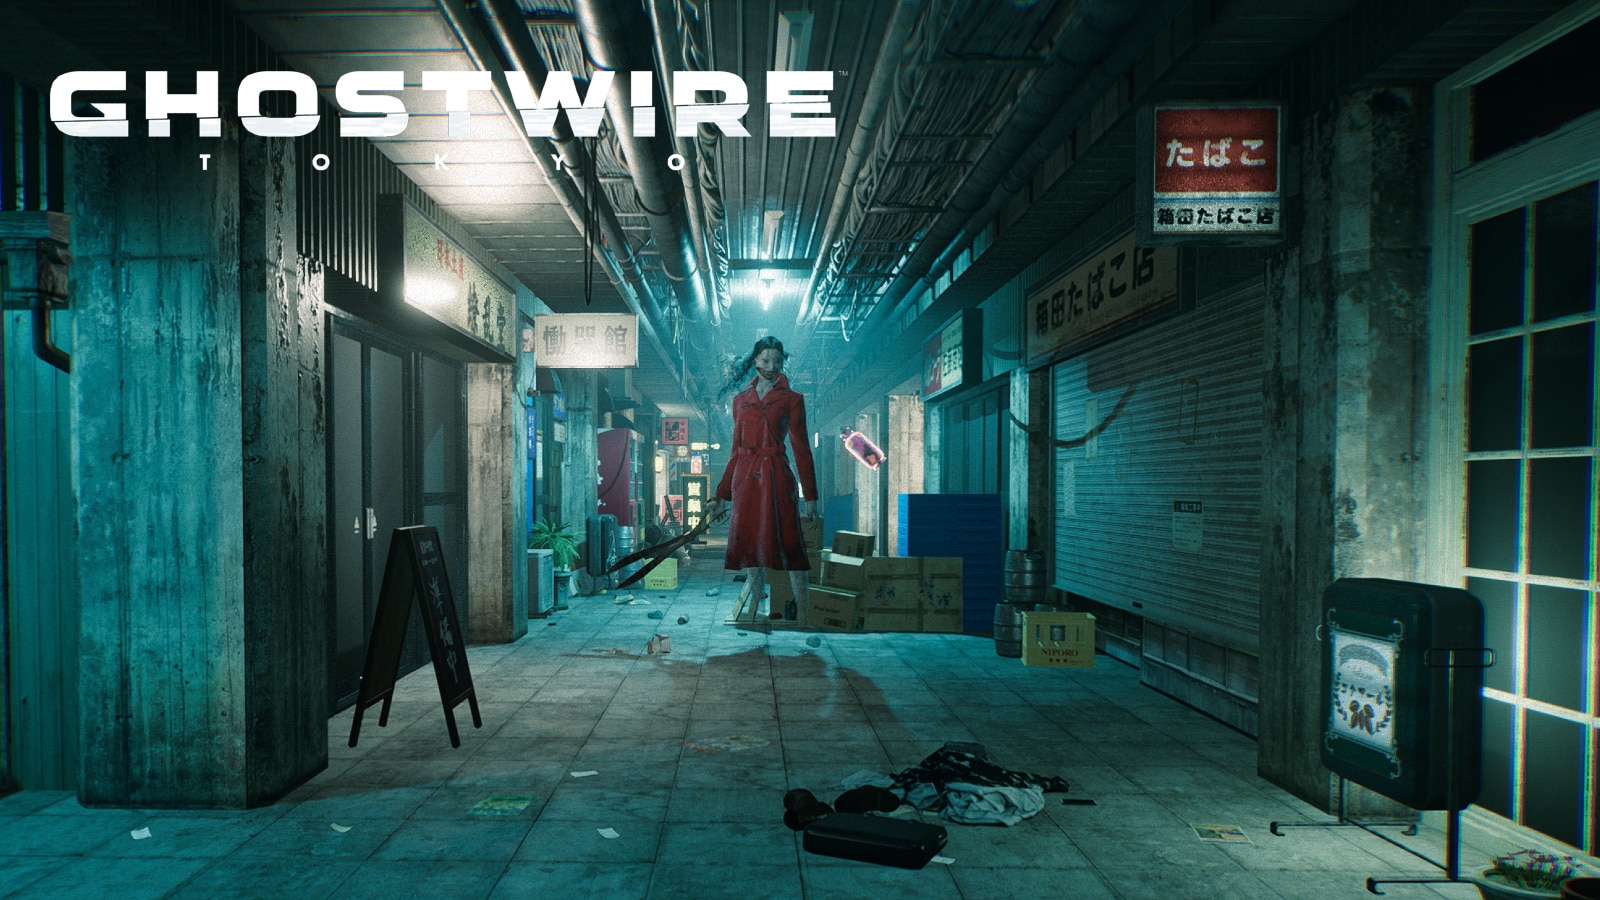 ghostwire tokyo visitor floats towards camera in red dress with mask